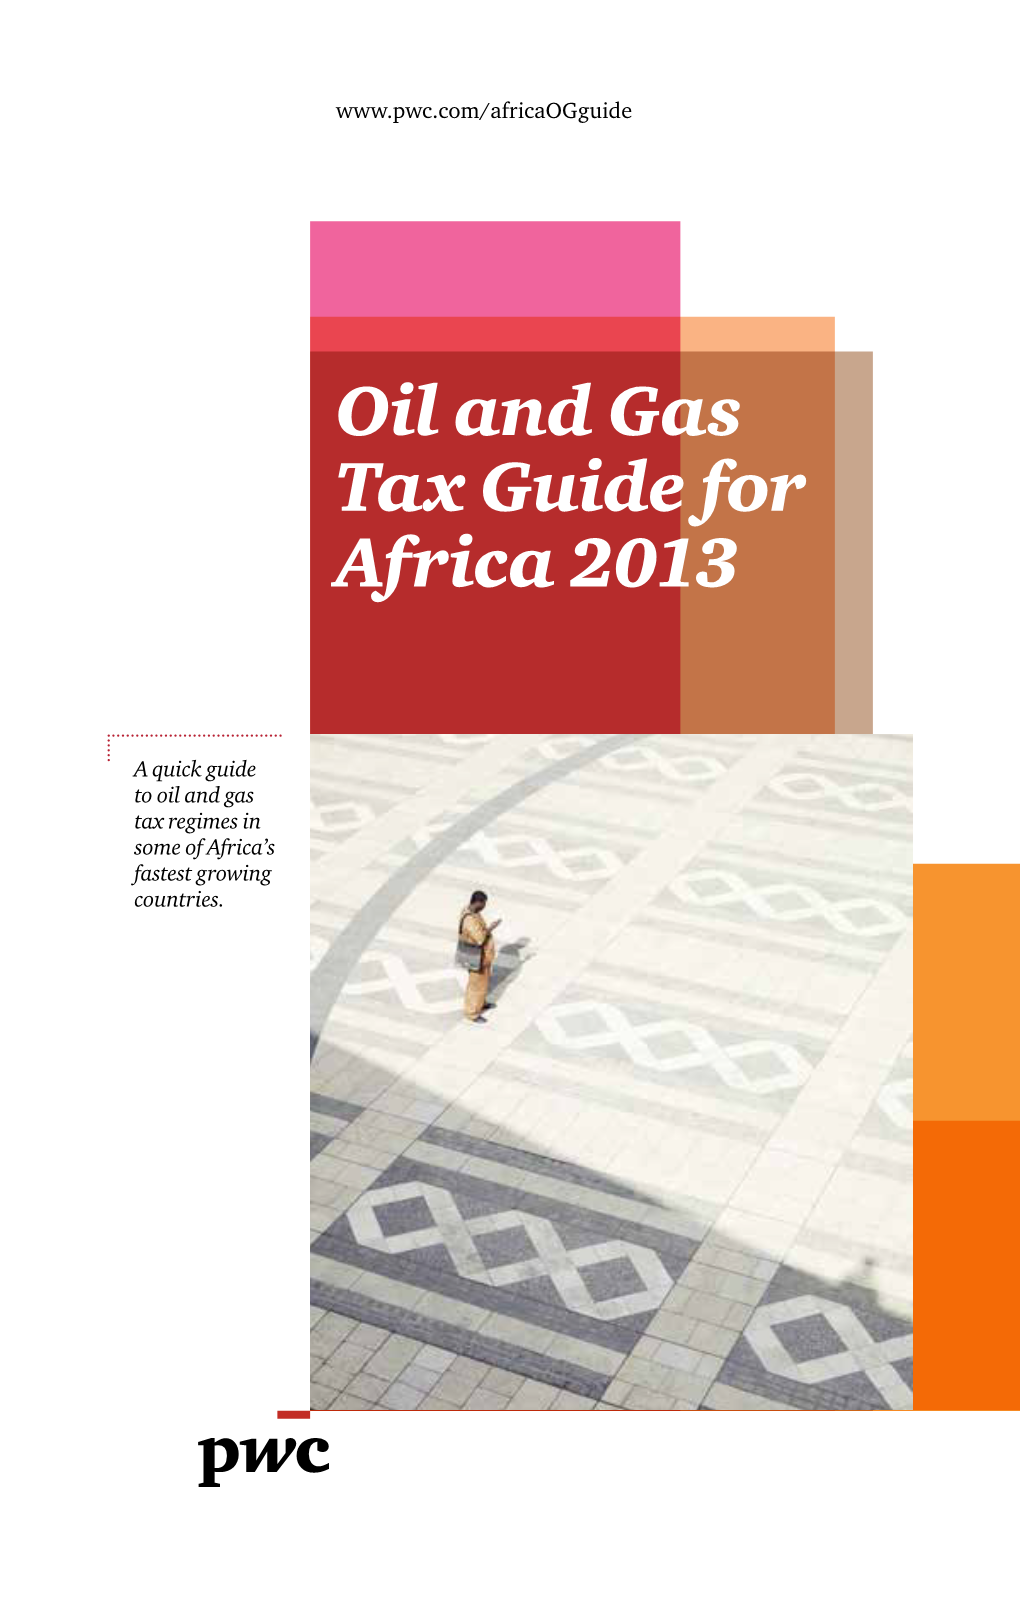 Oil and Gas Tax Guide for Africa 2013